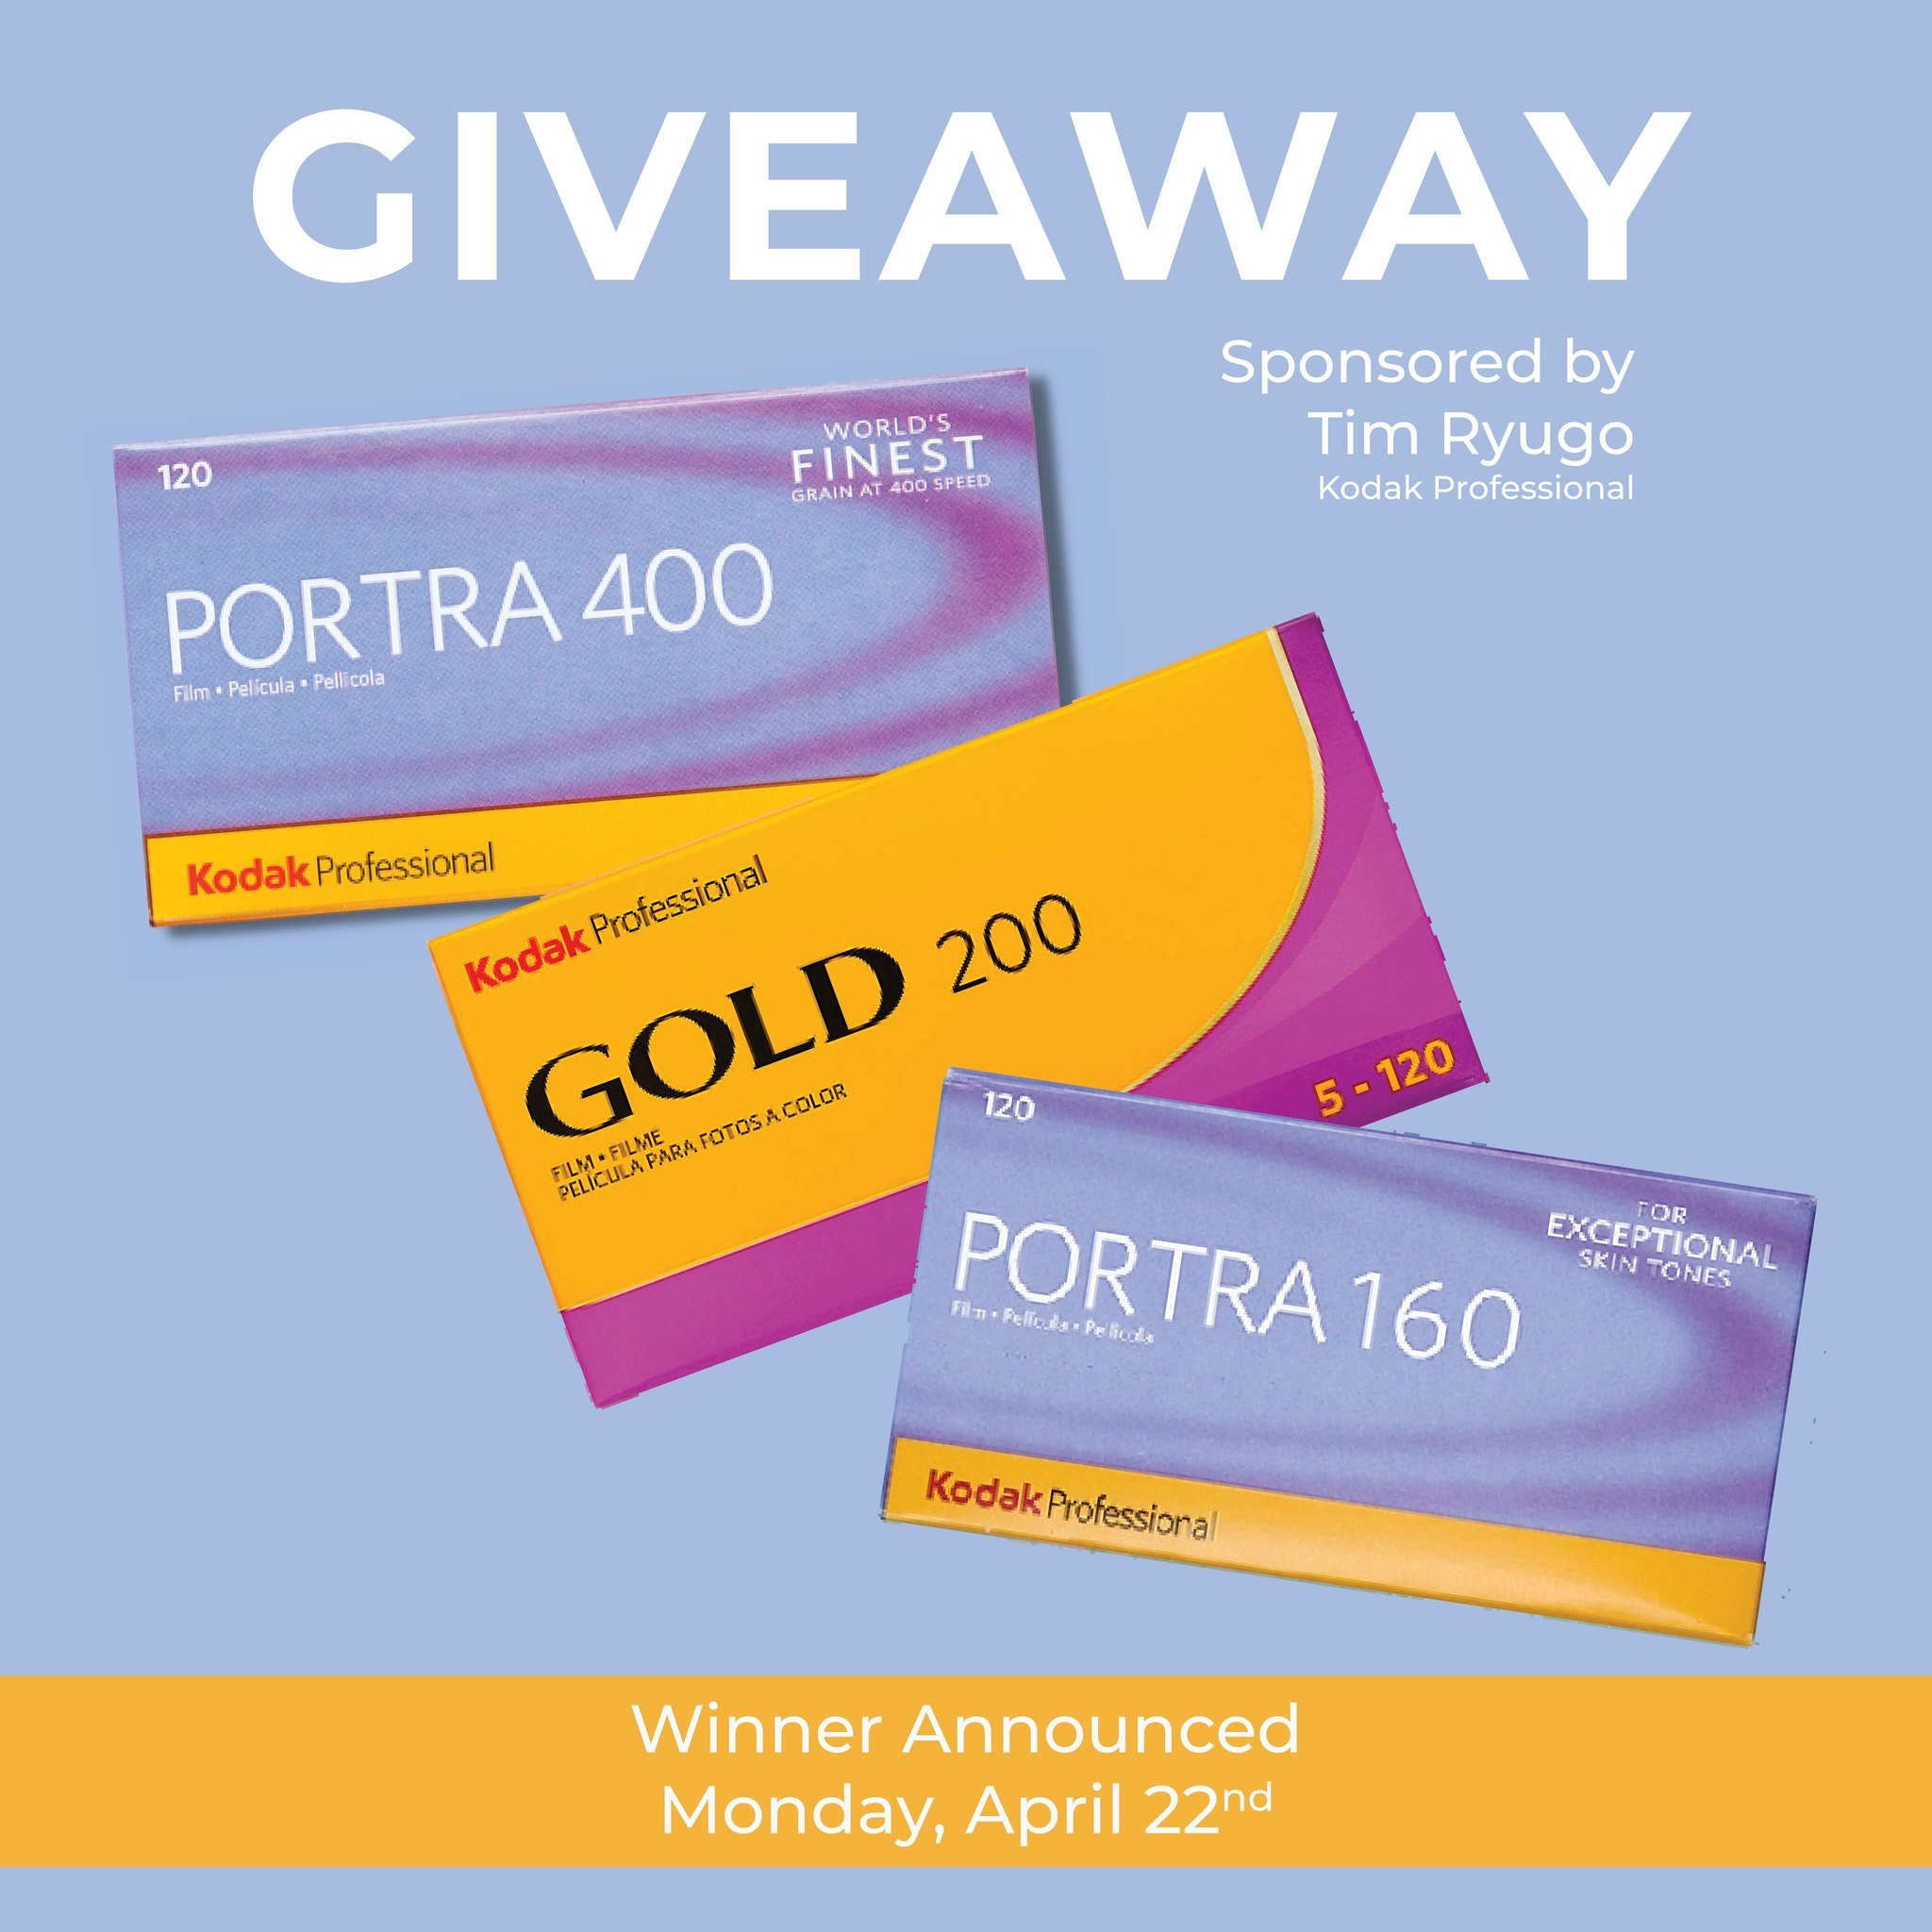 🎞️ BIG FILM GIVEAWAY 🎞️
Thanks to the great @timryugo_kodakprofessional 🧡
We will be giving away a pack of each Portra 400, Portra 160 &amp; Gold 200 in 120! 

To win you simply must be: 
1) Following @rewindfilmlab &amp; @timryugo_kodakprofession